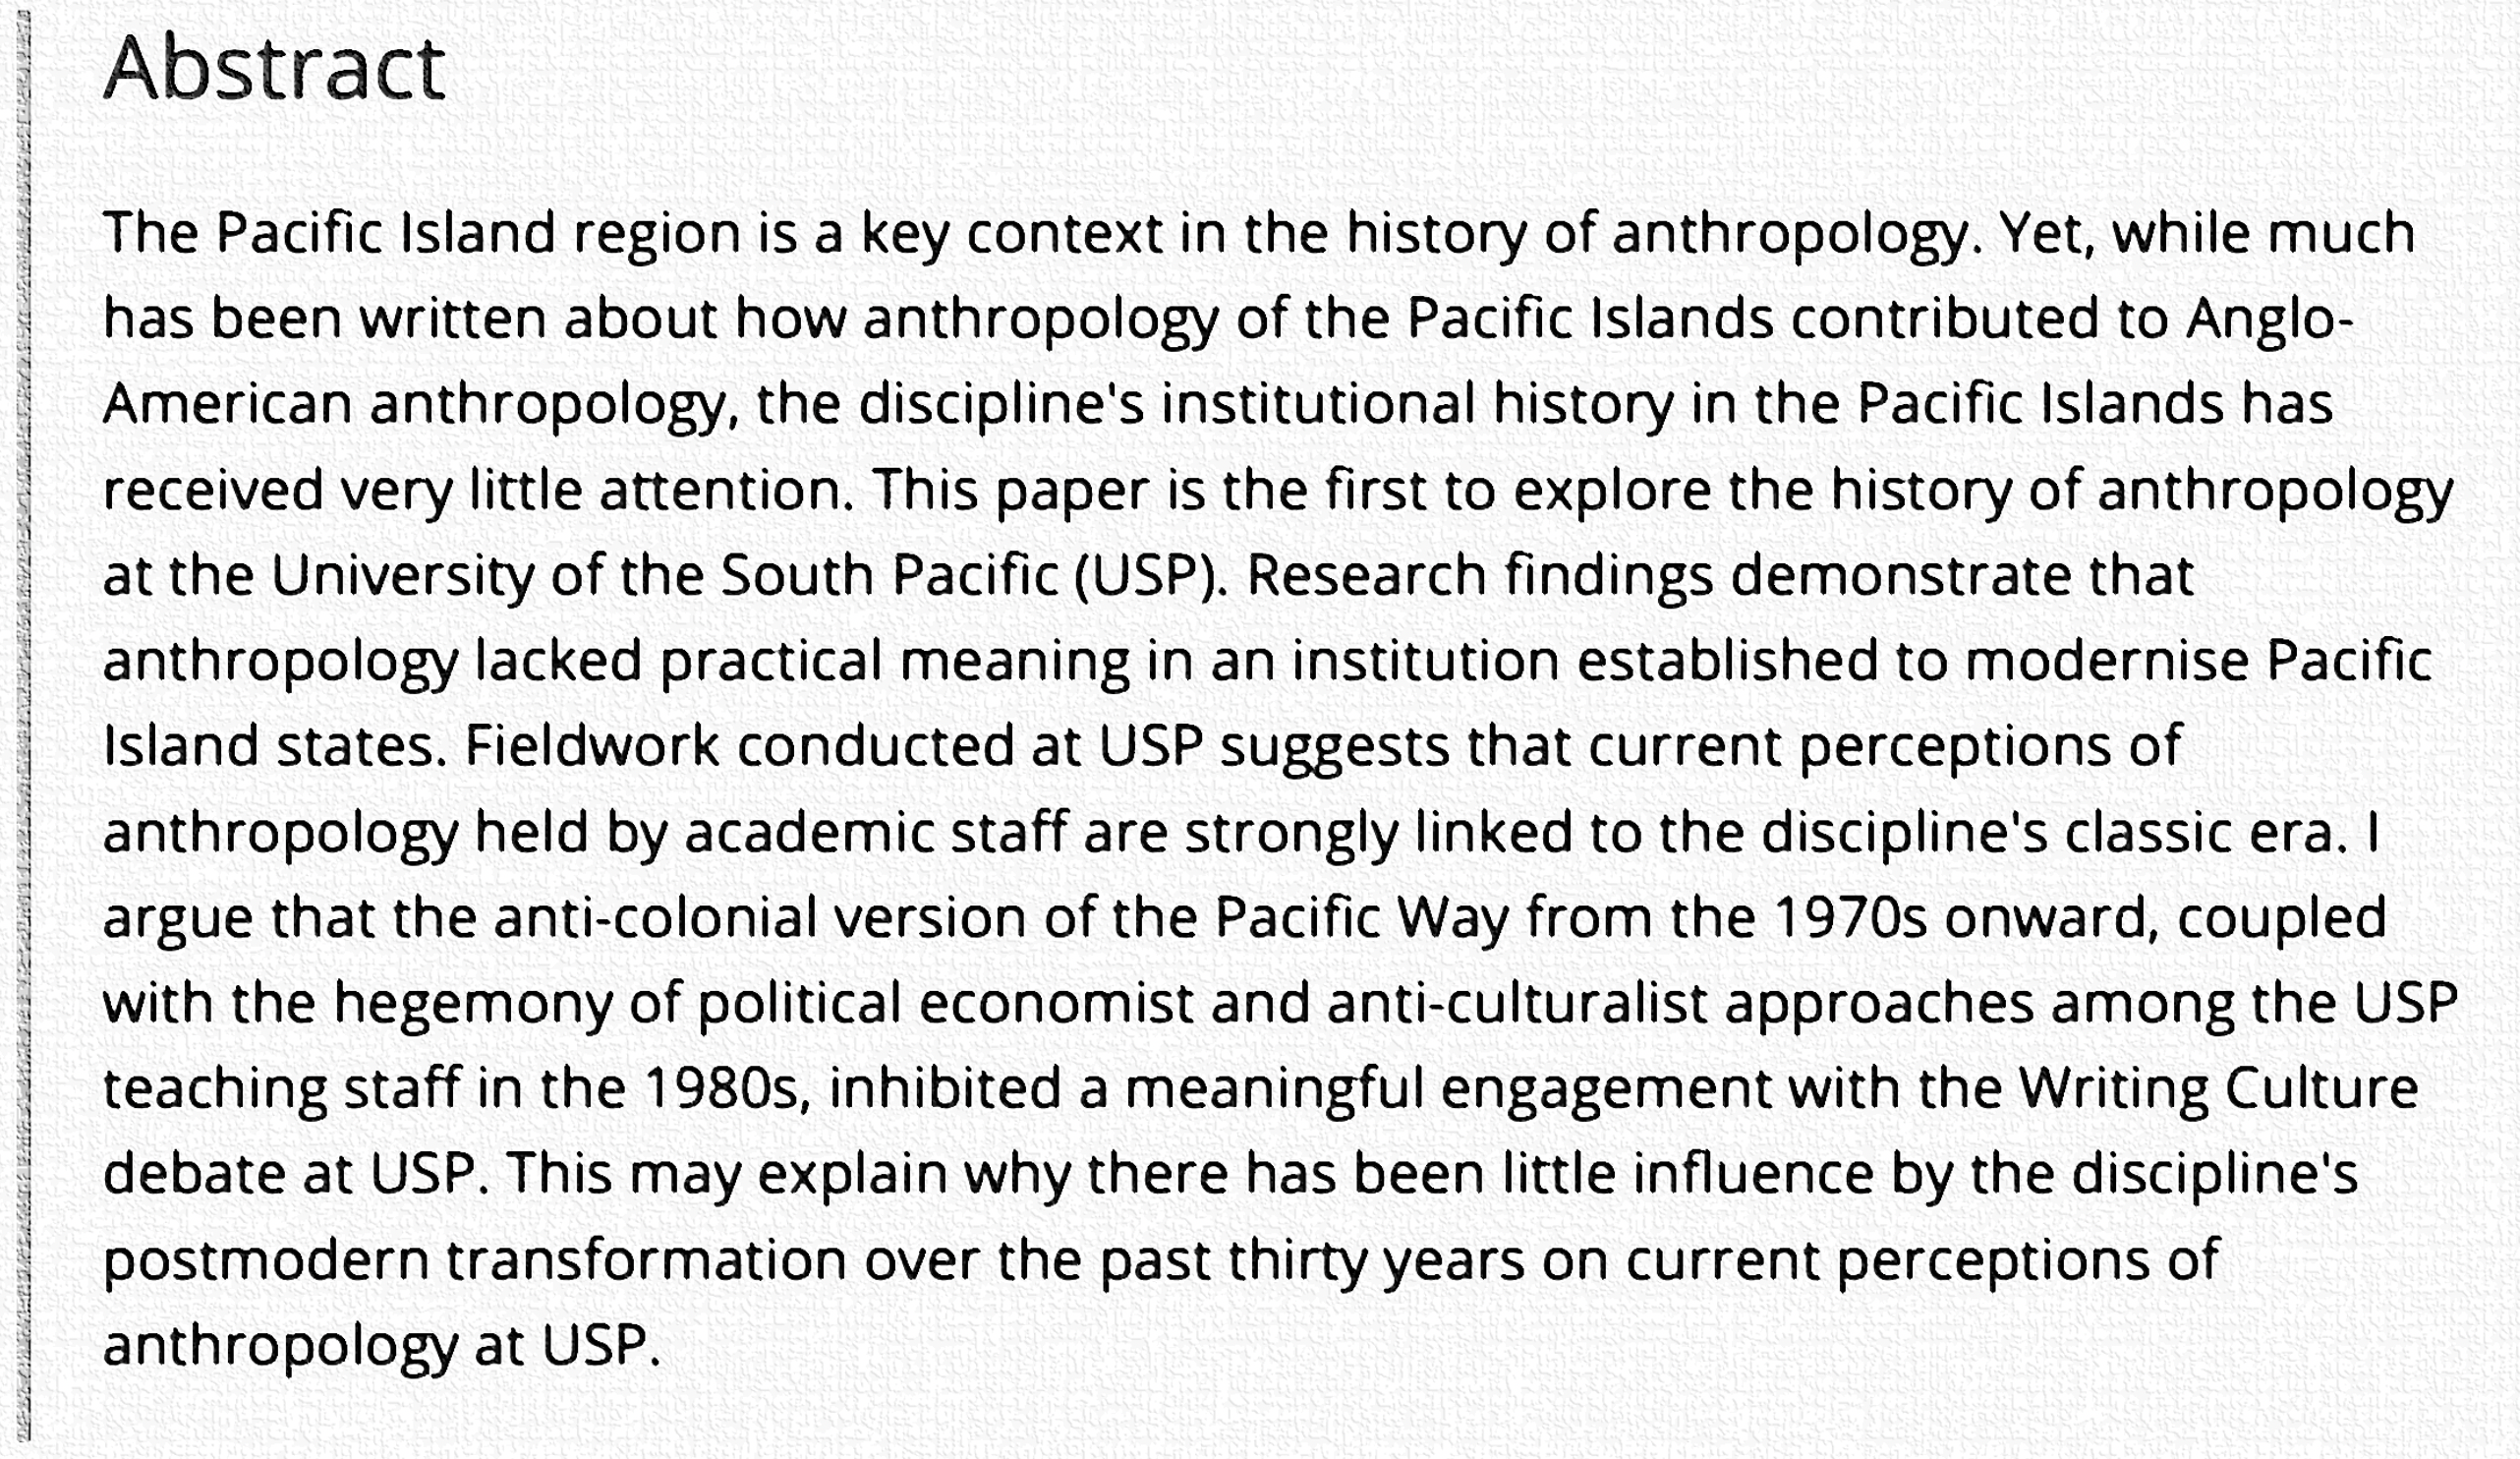 Journal article by Kim Andreas Kessler about Anthropology at the University of the South Pacific (USP)